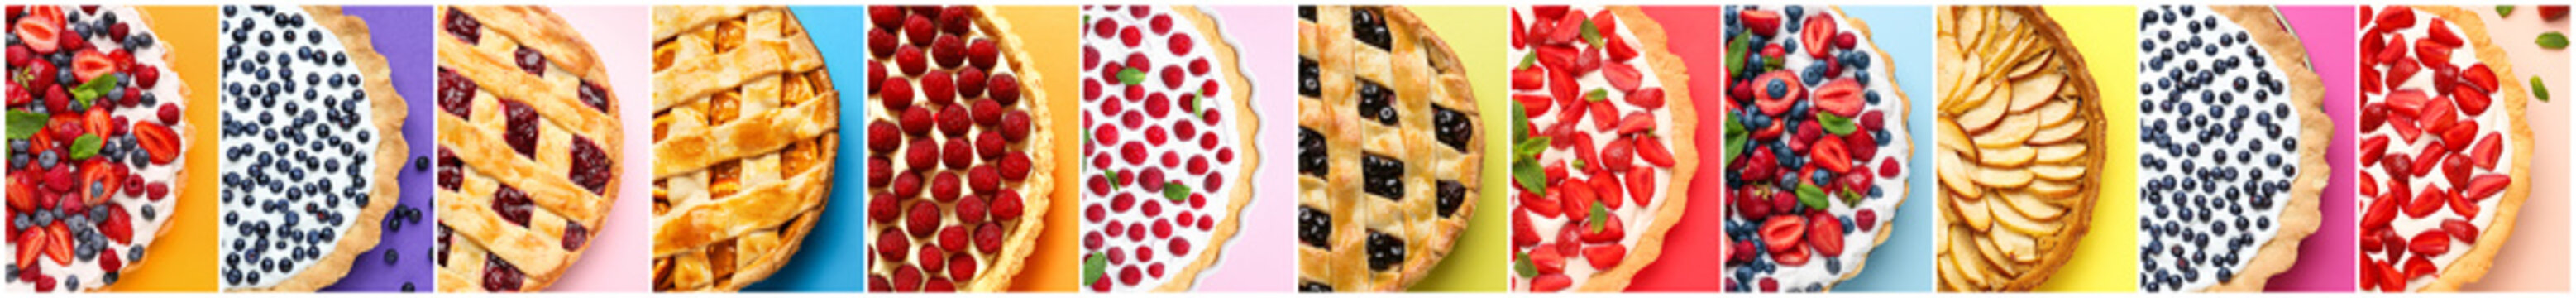 Collage of photos with different tasty pies